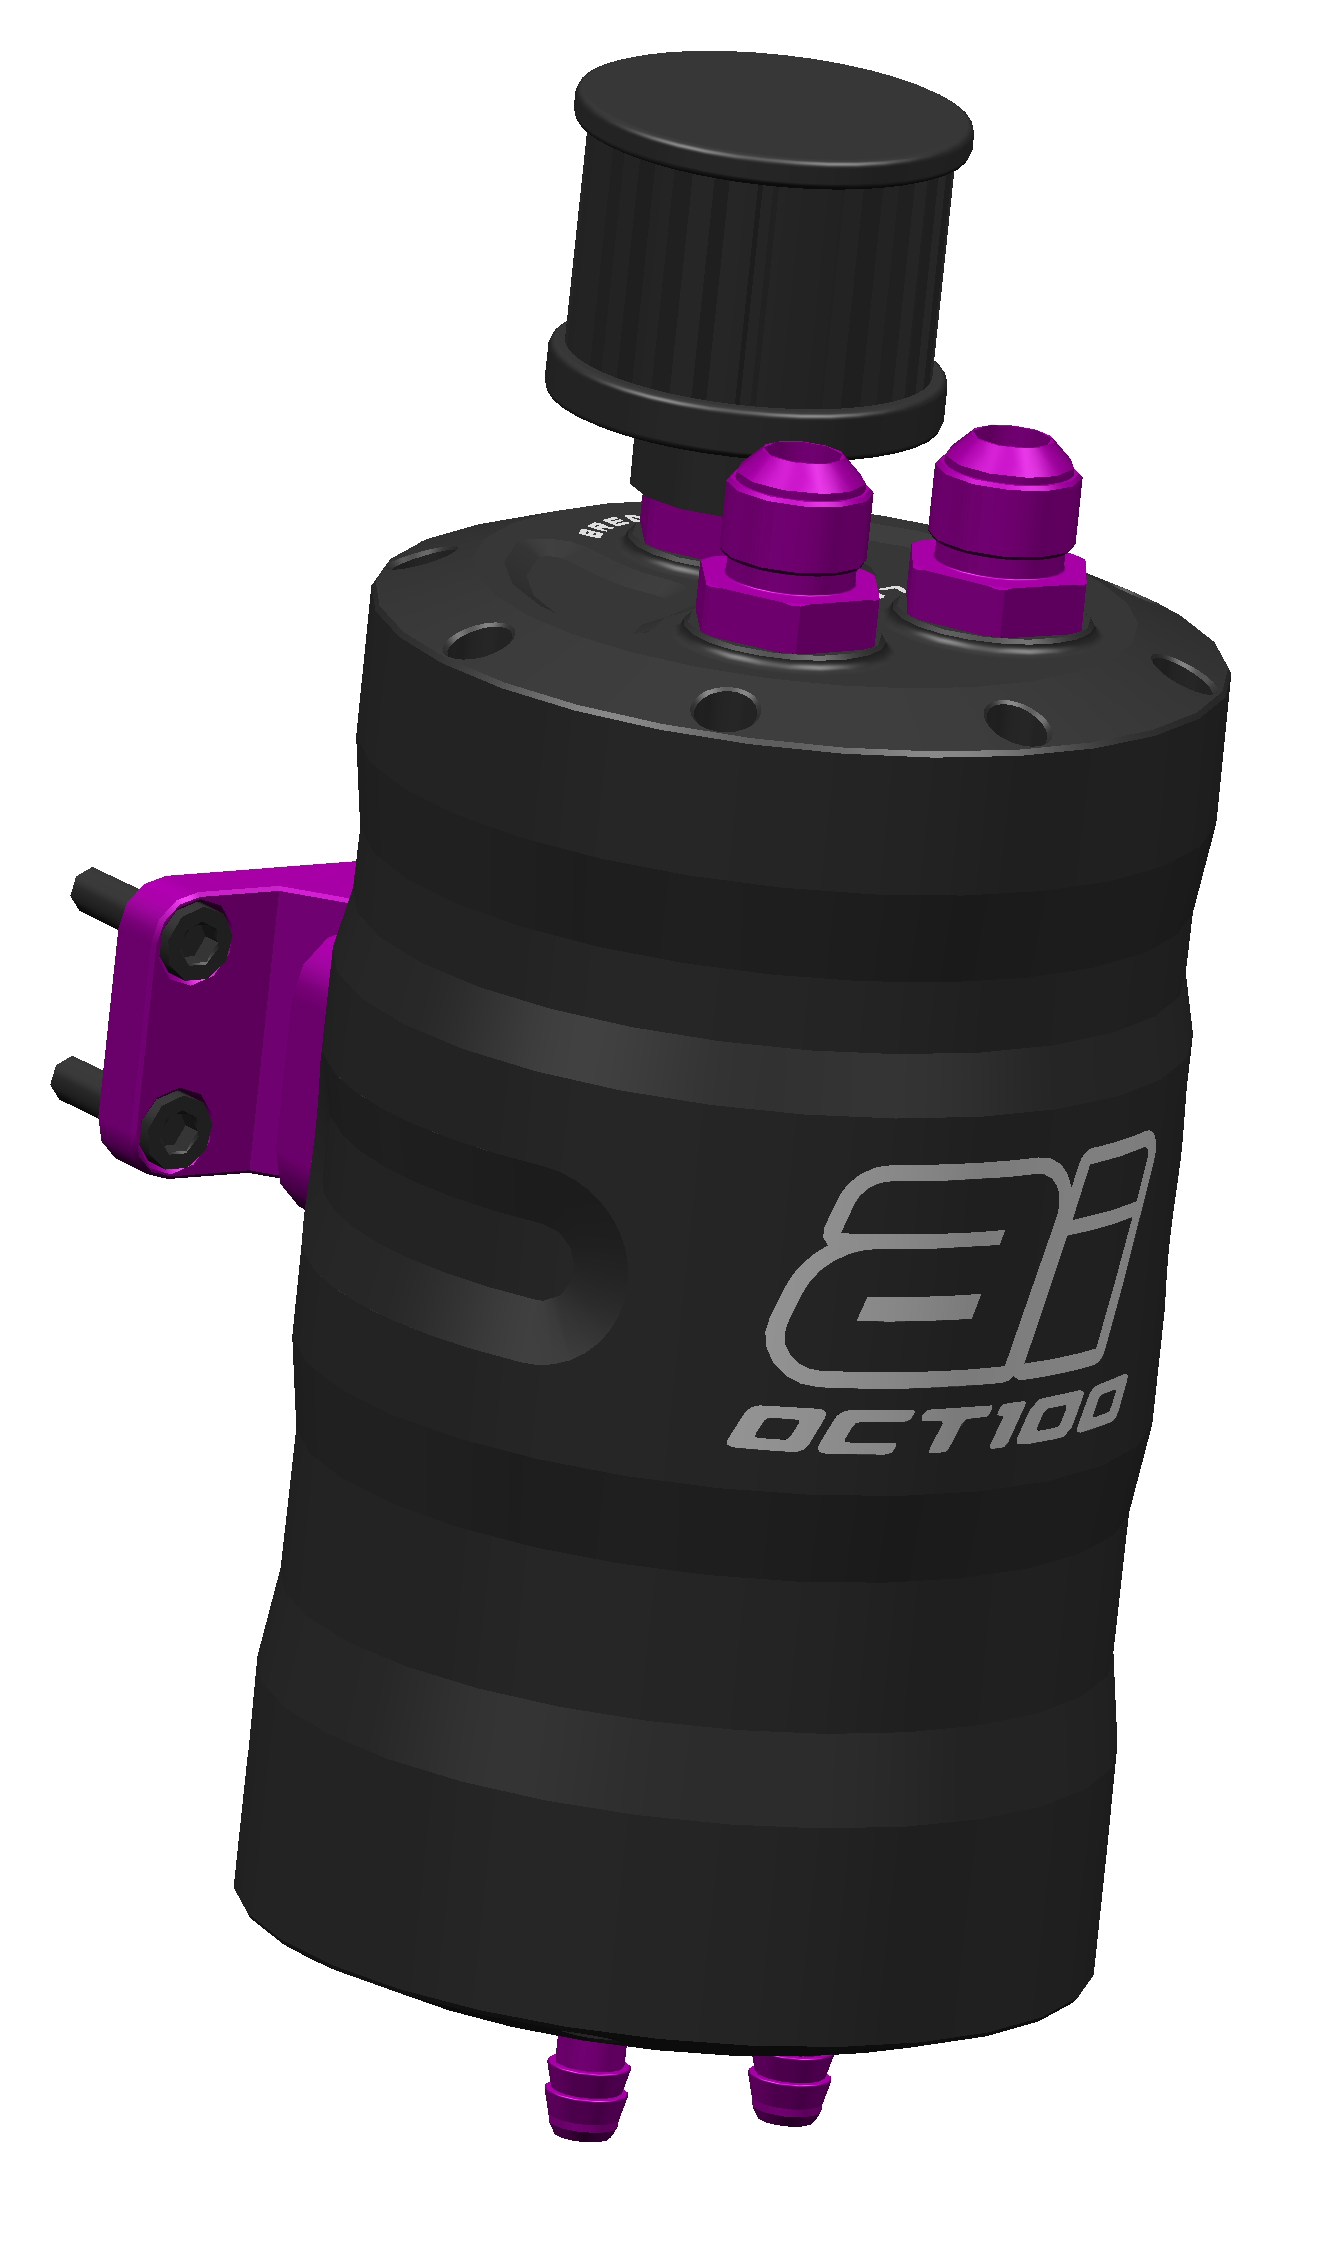 Oil Catch Tank (OCT100) - Aftermarket Industries